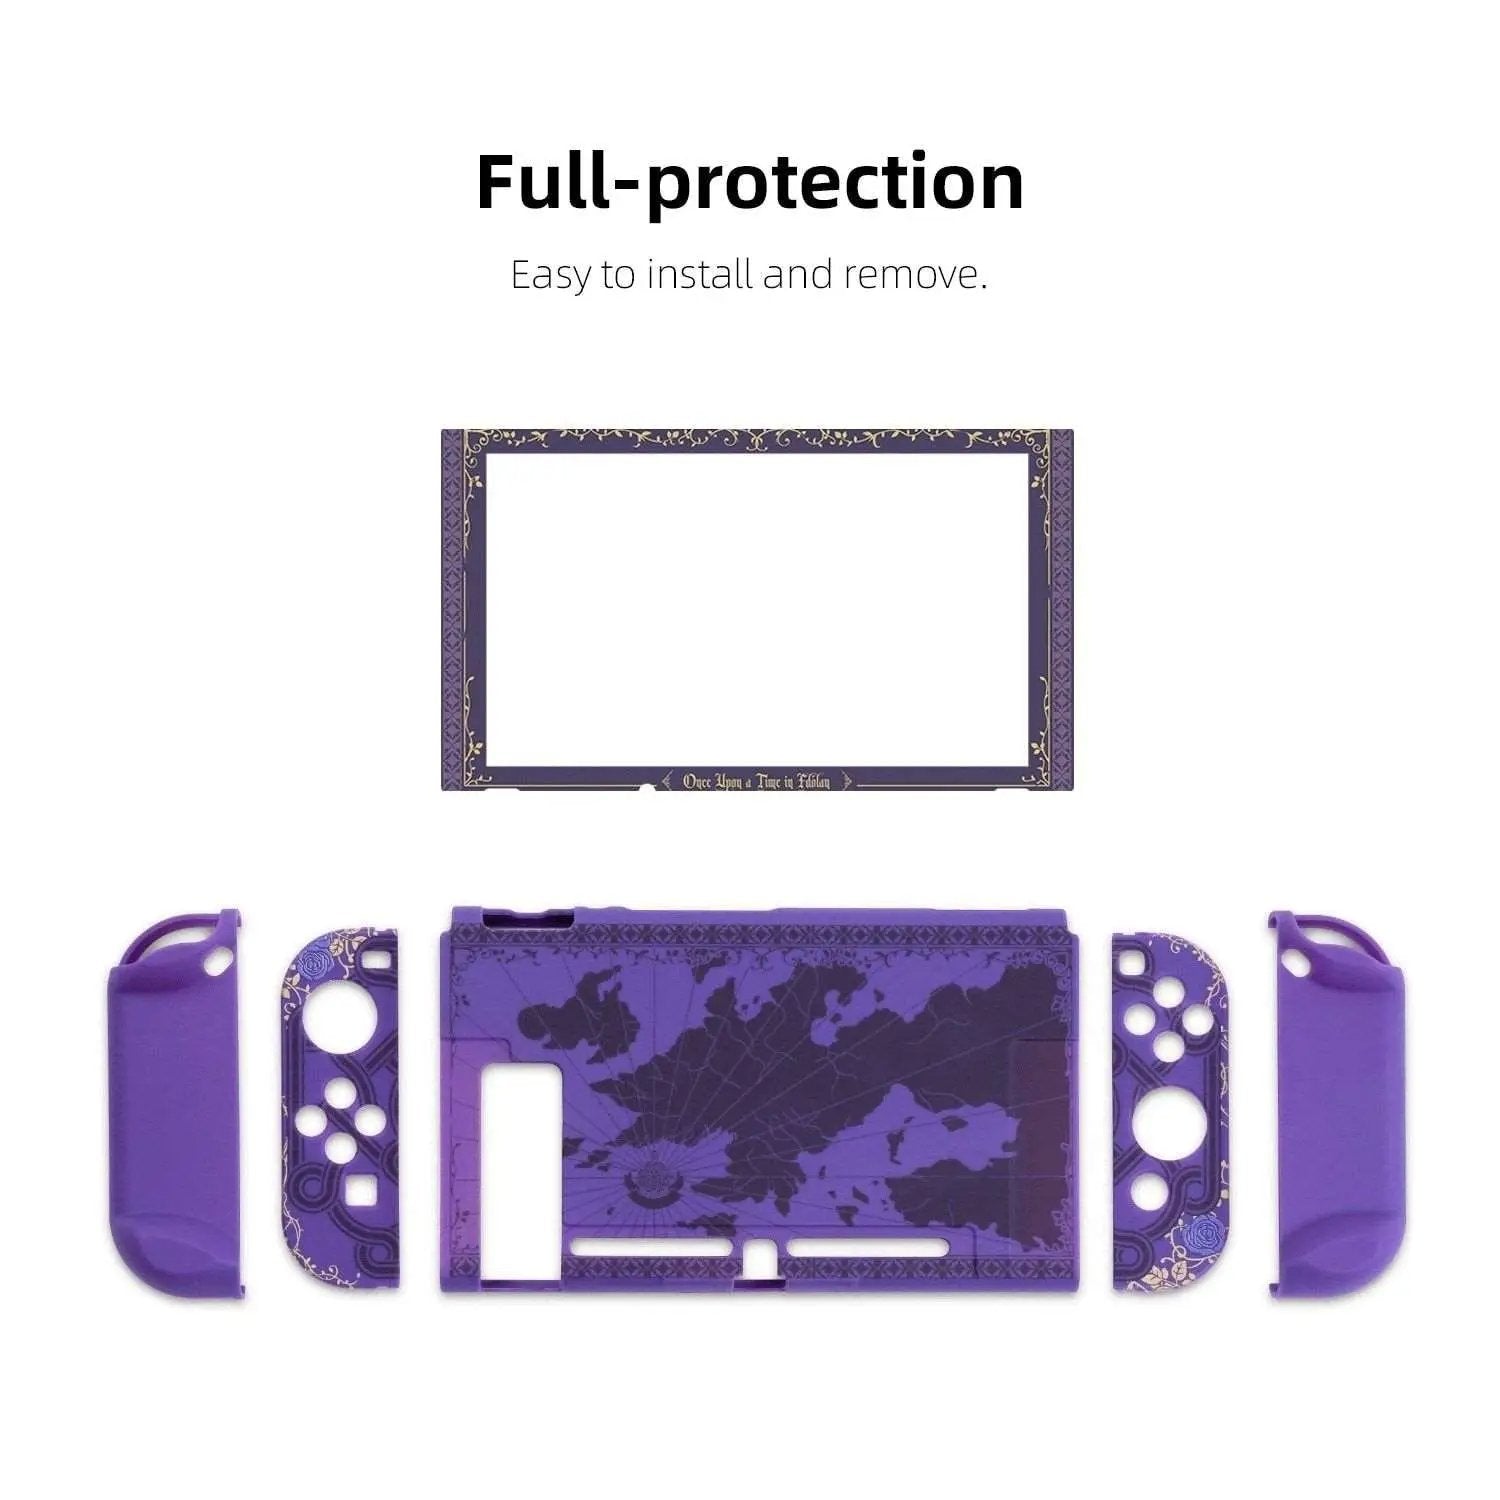 Medieval Fairytale Case - Nintendo Switch - SwitchOutfits